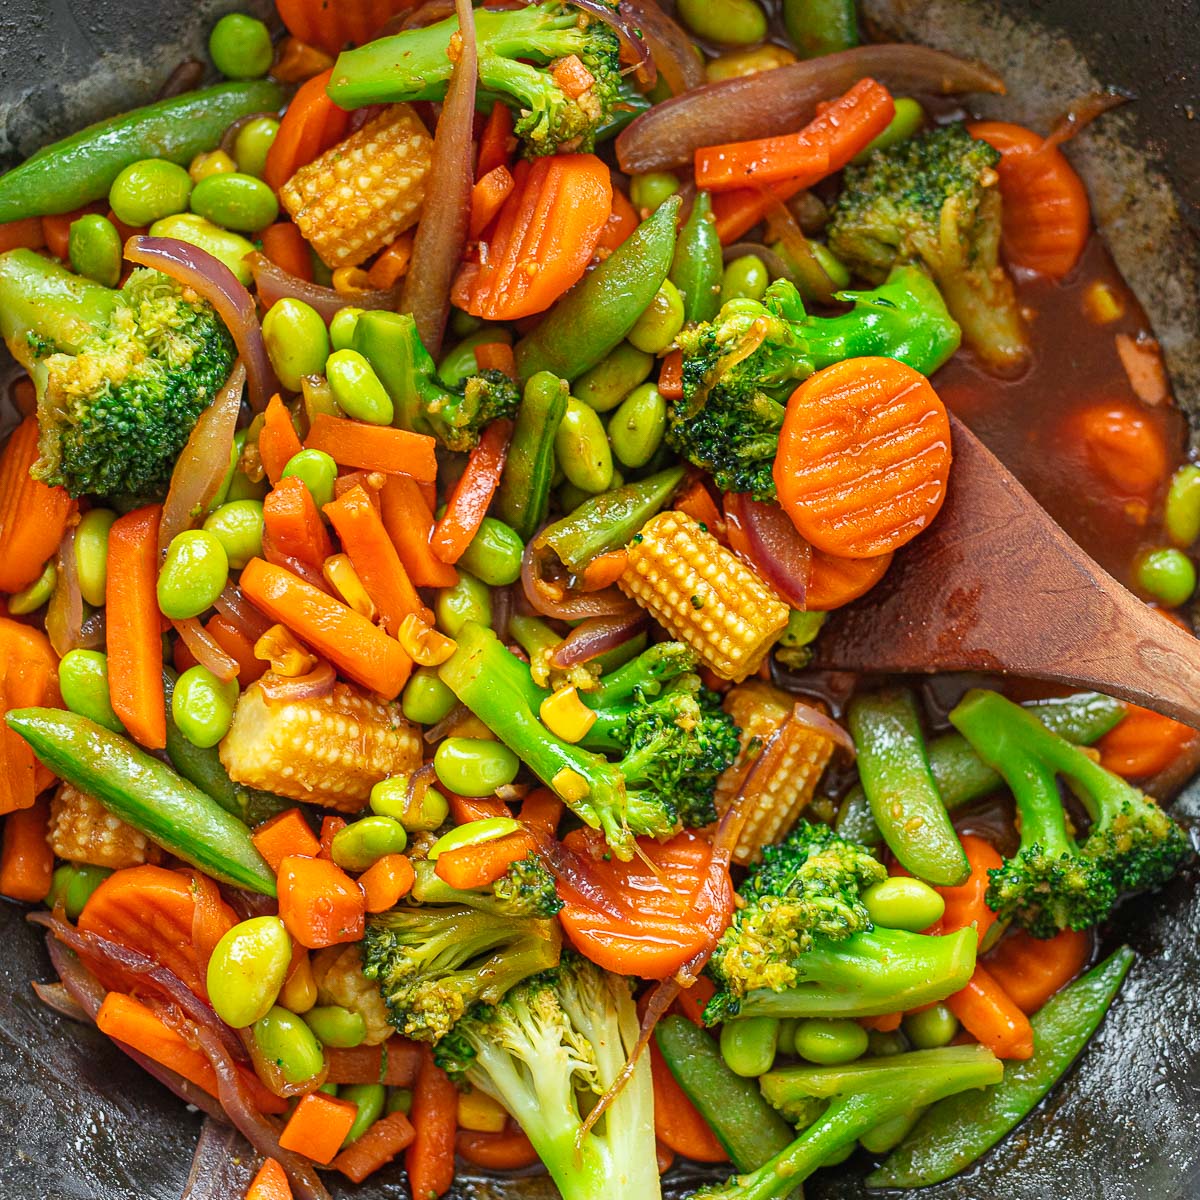 Stir-fry frozen vegetable mix in a pan, add shredded carrots, broccoli, baby corn, and peas.